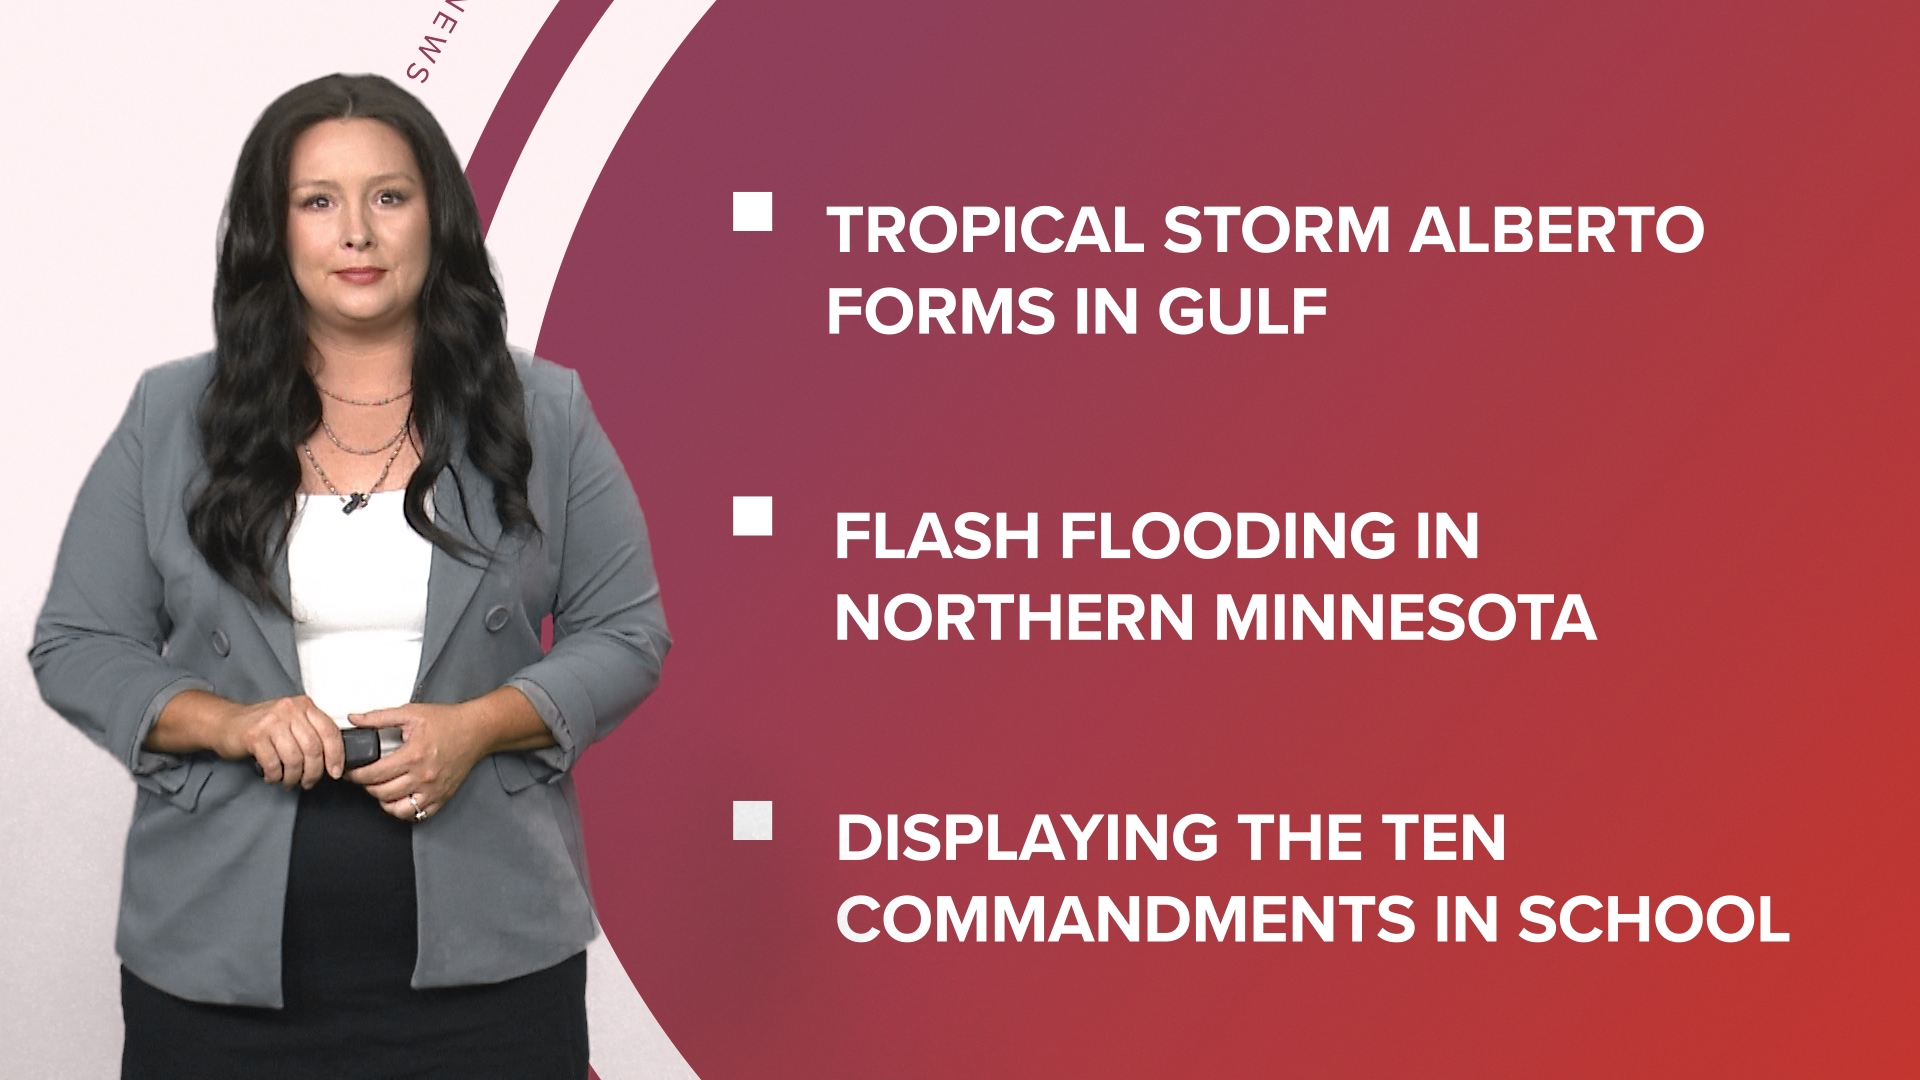 A look at what is happening in the news from a tropical storm brewing in the Gulf to Louisiana to display the 10 commandments in public schools and more.